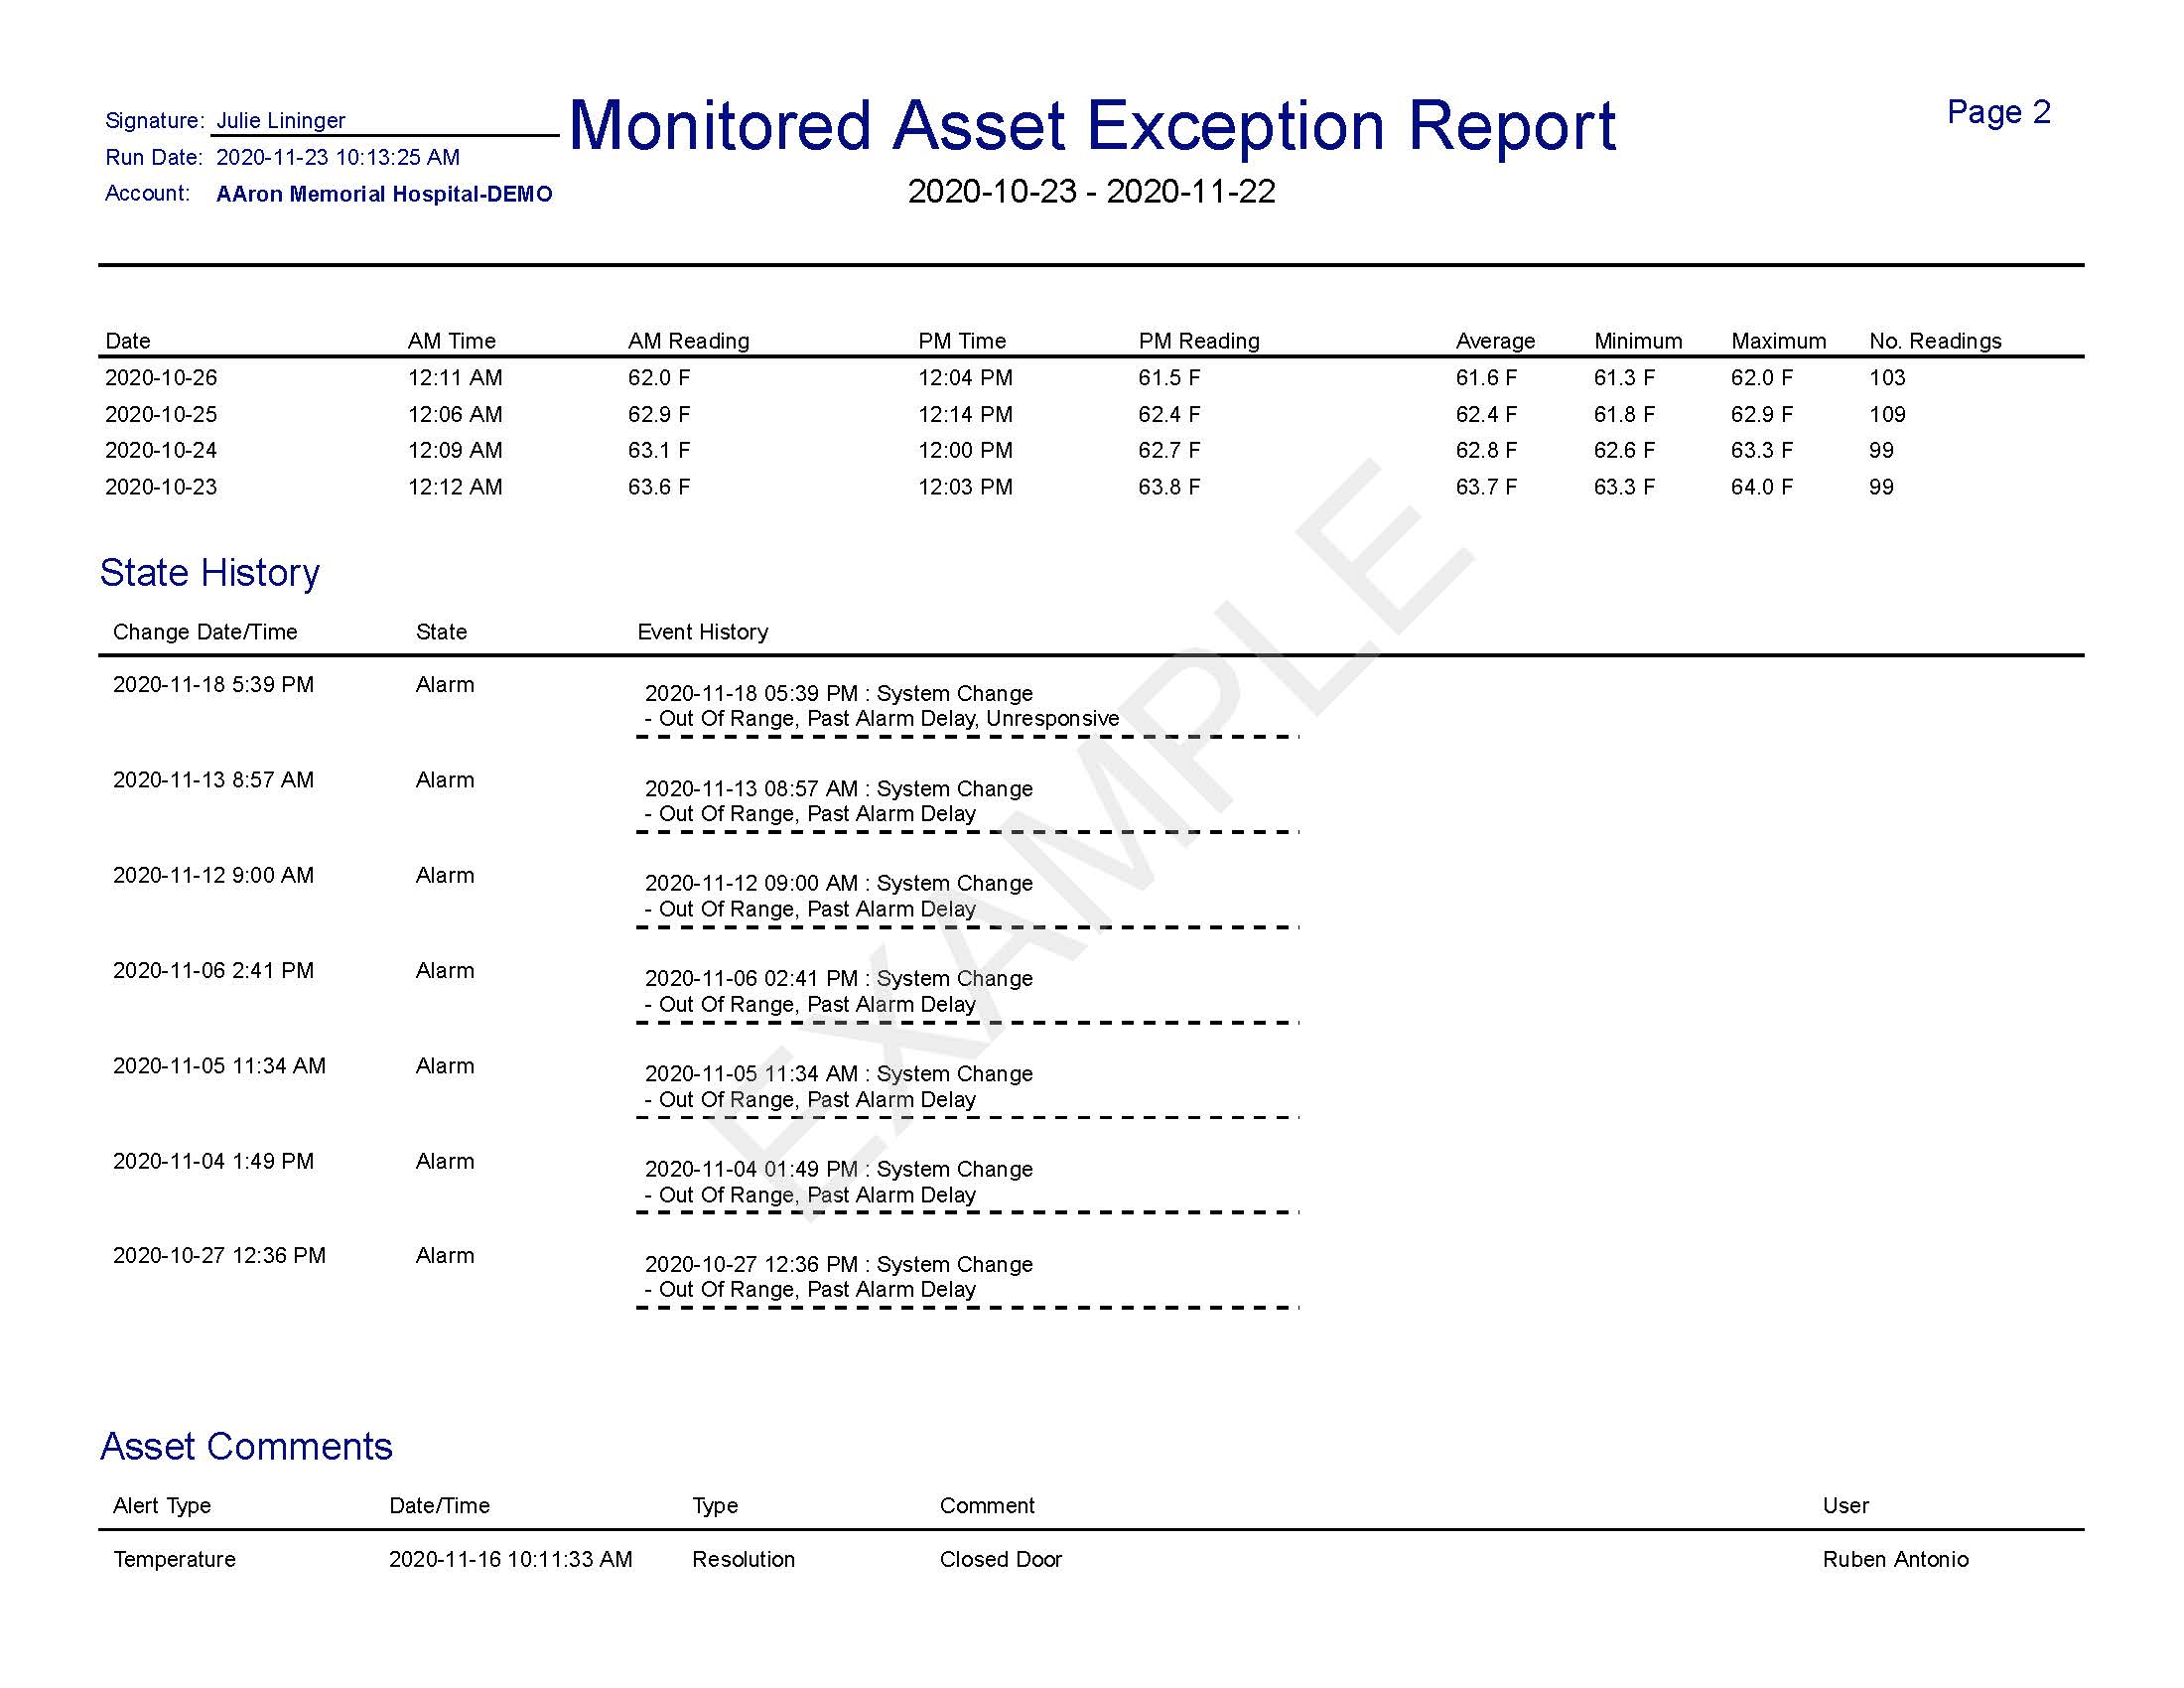 sense-monitored-asset-exception-report_Page_2.jpg